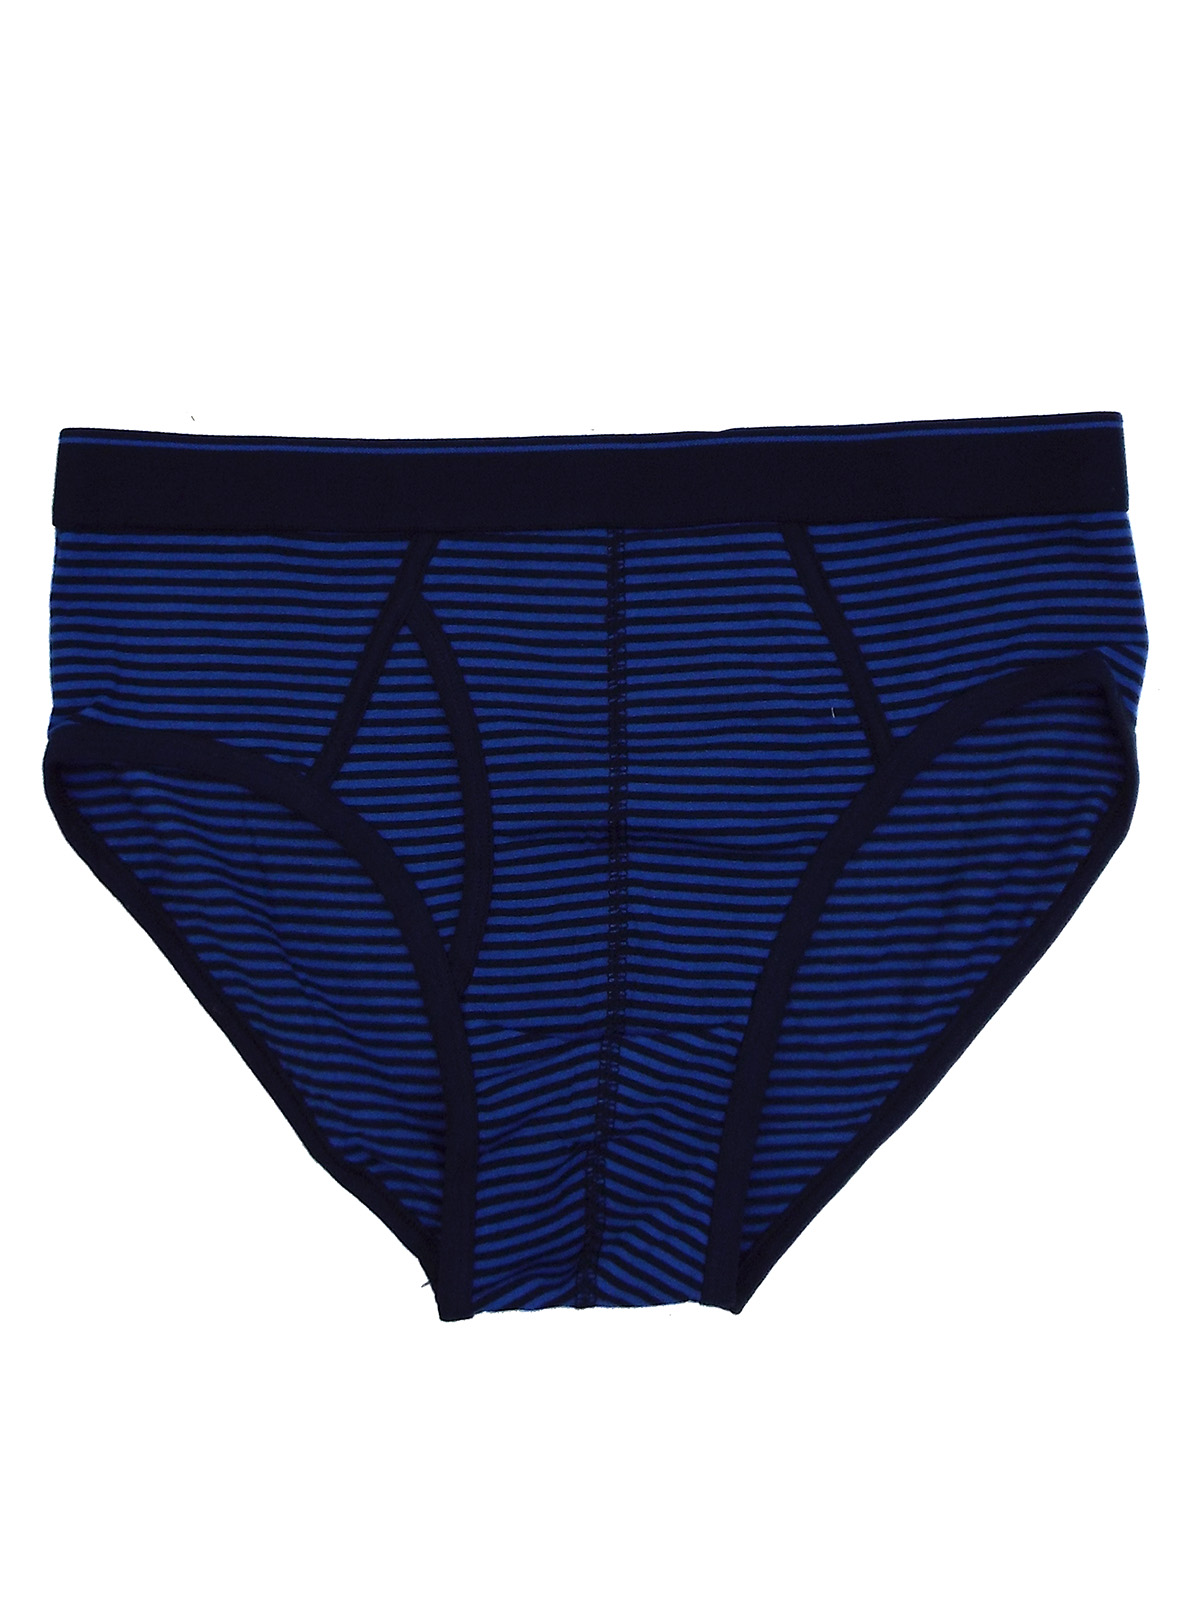 Marks and Spencer - - M&5 BLUE Mens Cotton Rich Striped Briefs - Size ...